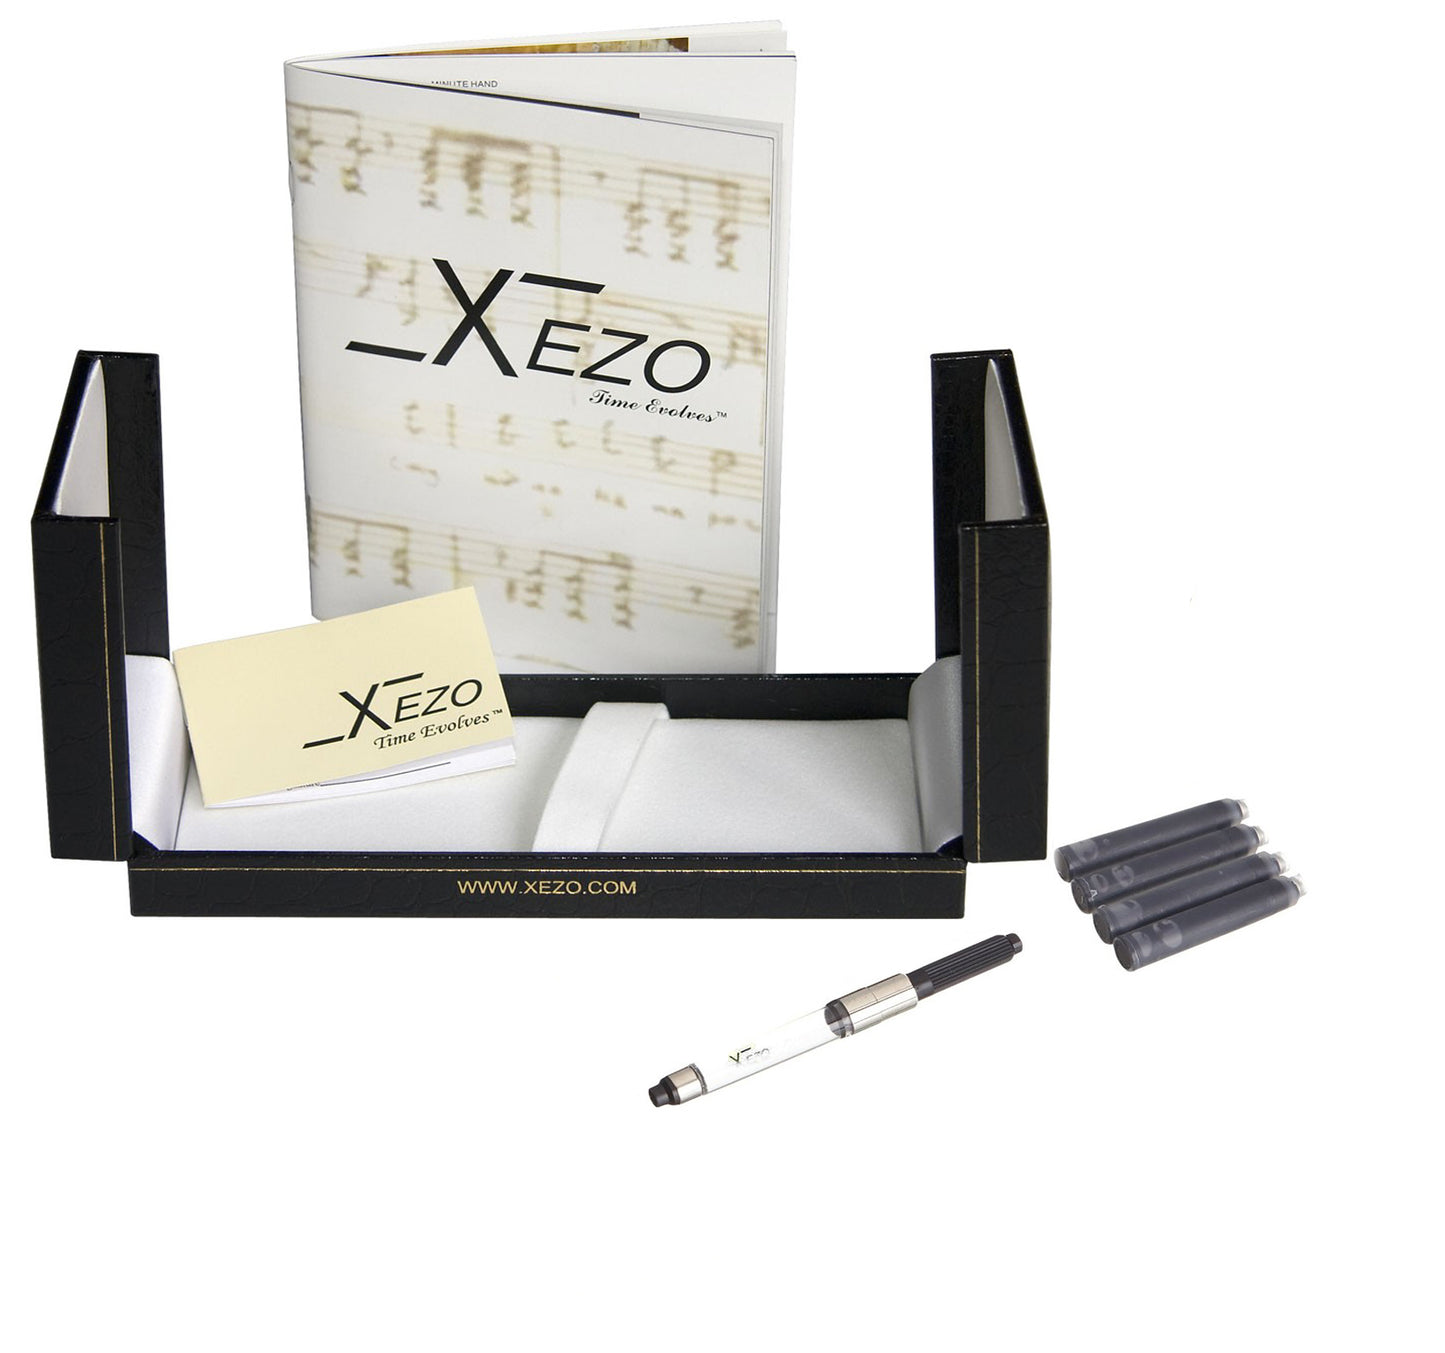 Xezo - Black gift box, certificate, manual, chrome-plated ink converter, and four ink cartridges of the Maestro 925 Sterling Silver EF fountain pen